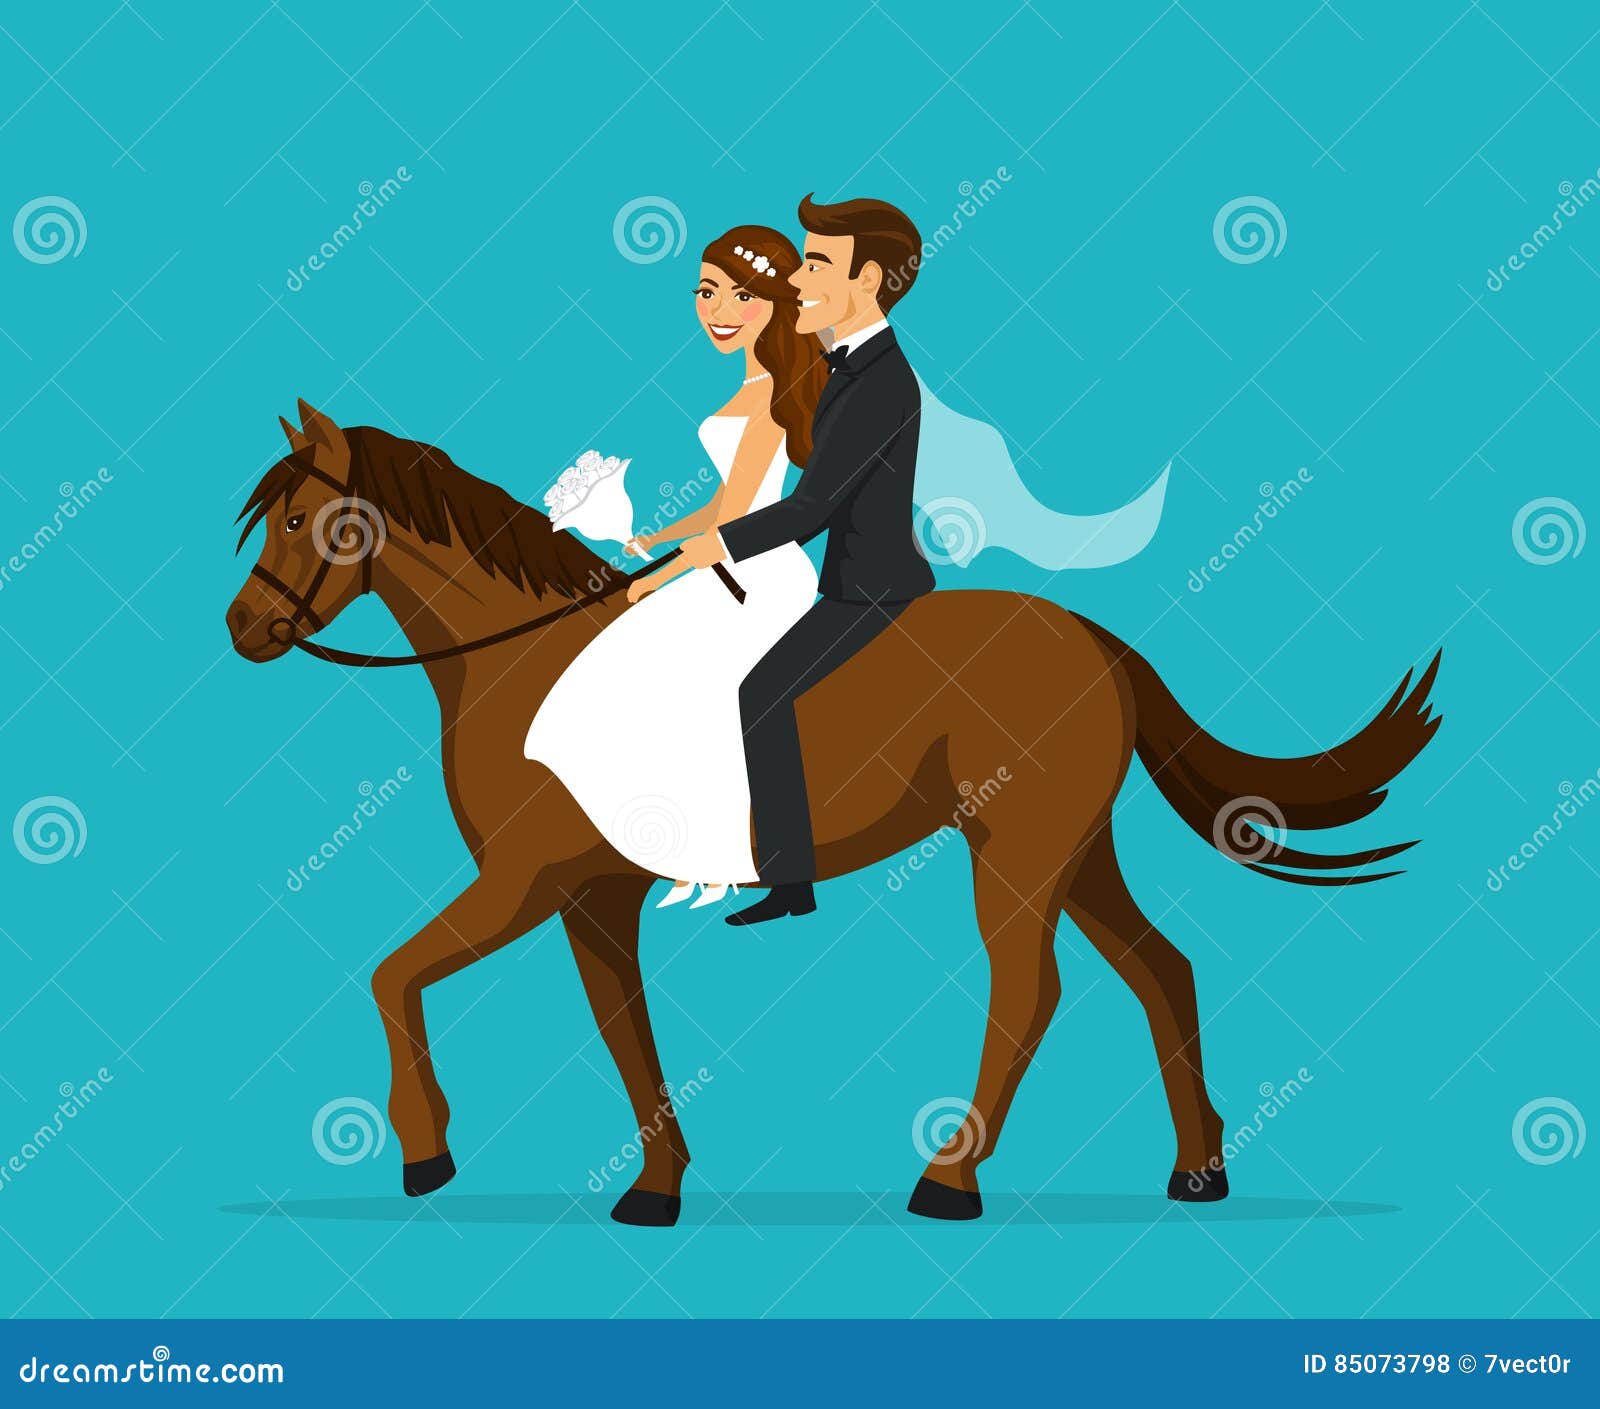 Newlyweds Bride And Groom Riding Horse On Wedding Day Vector